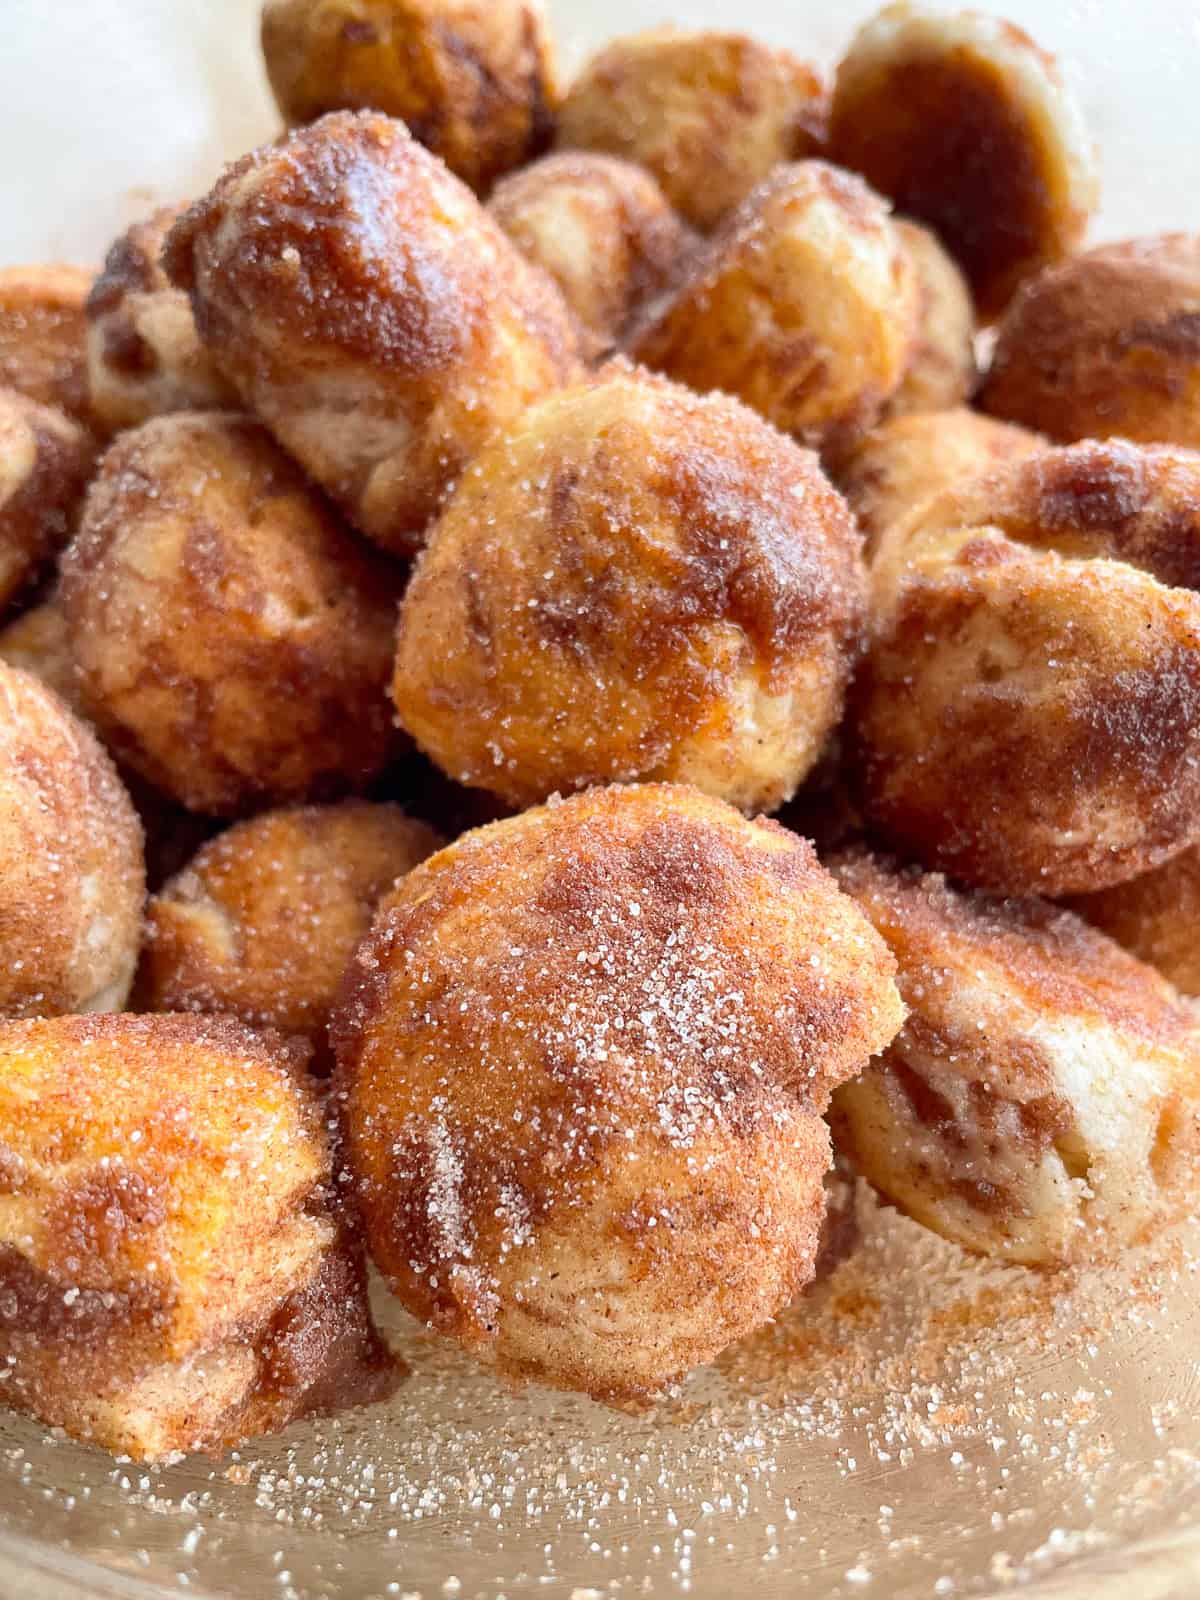 Cinnamon sugar biscuit donut holes in the mixing bowl.